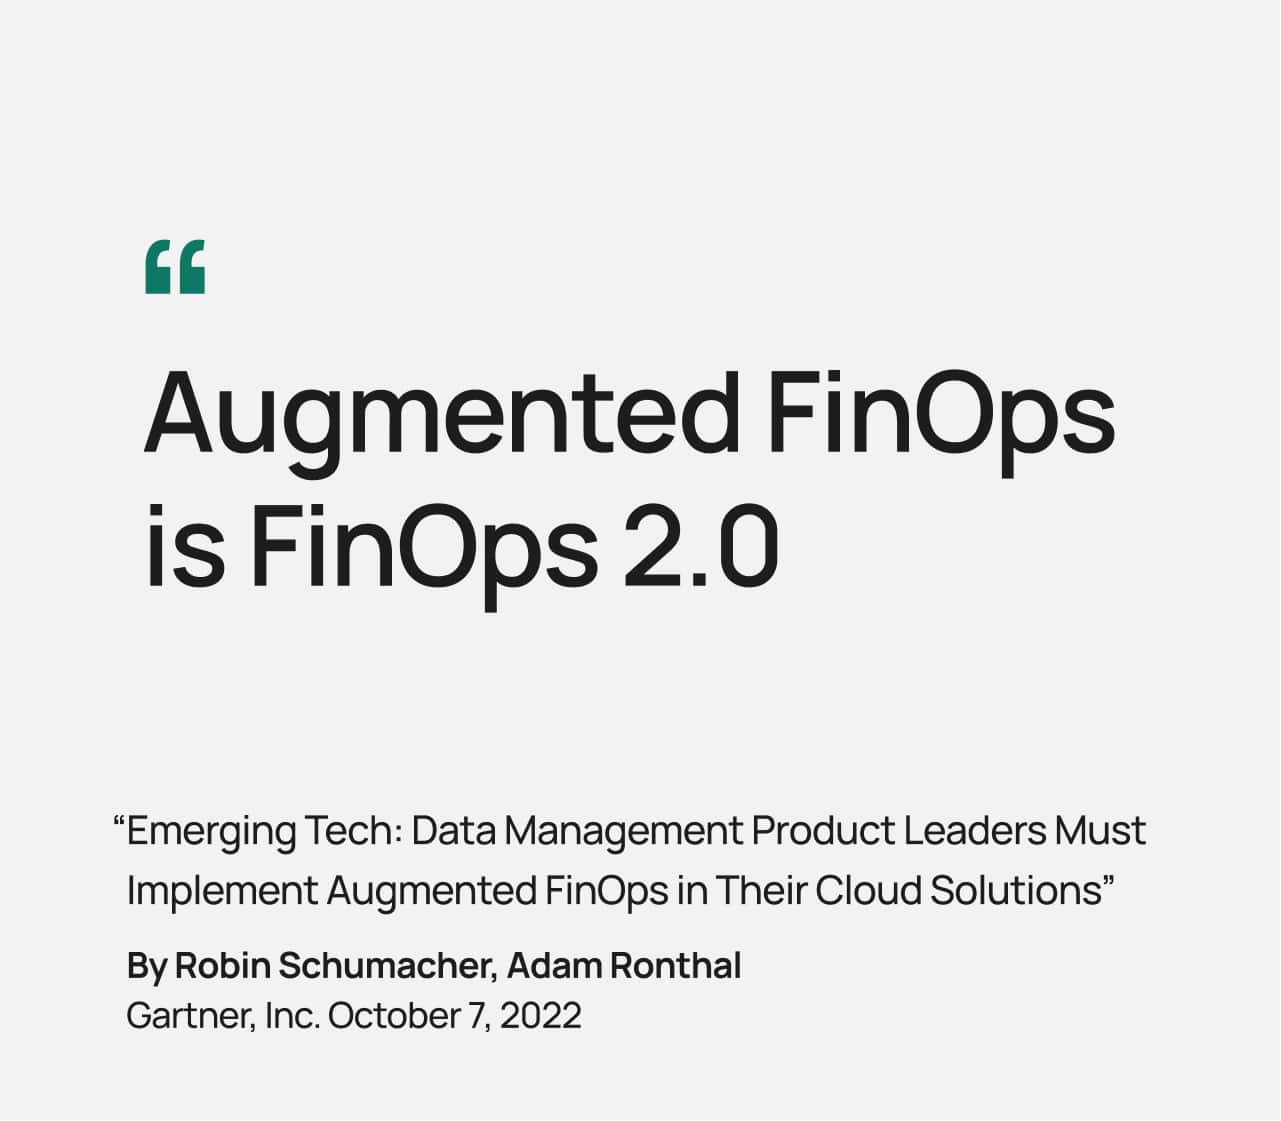 Augmented FinOps is FinOps 2.0 from “Emerging Tech: Data Management Product Leaders Must Implement Augmented FinOps in Their Cloud Solutions” By Robin Schumacher, Adam Ronthal Gartner, Inc. October 7, 2022